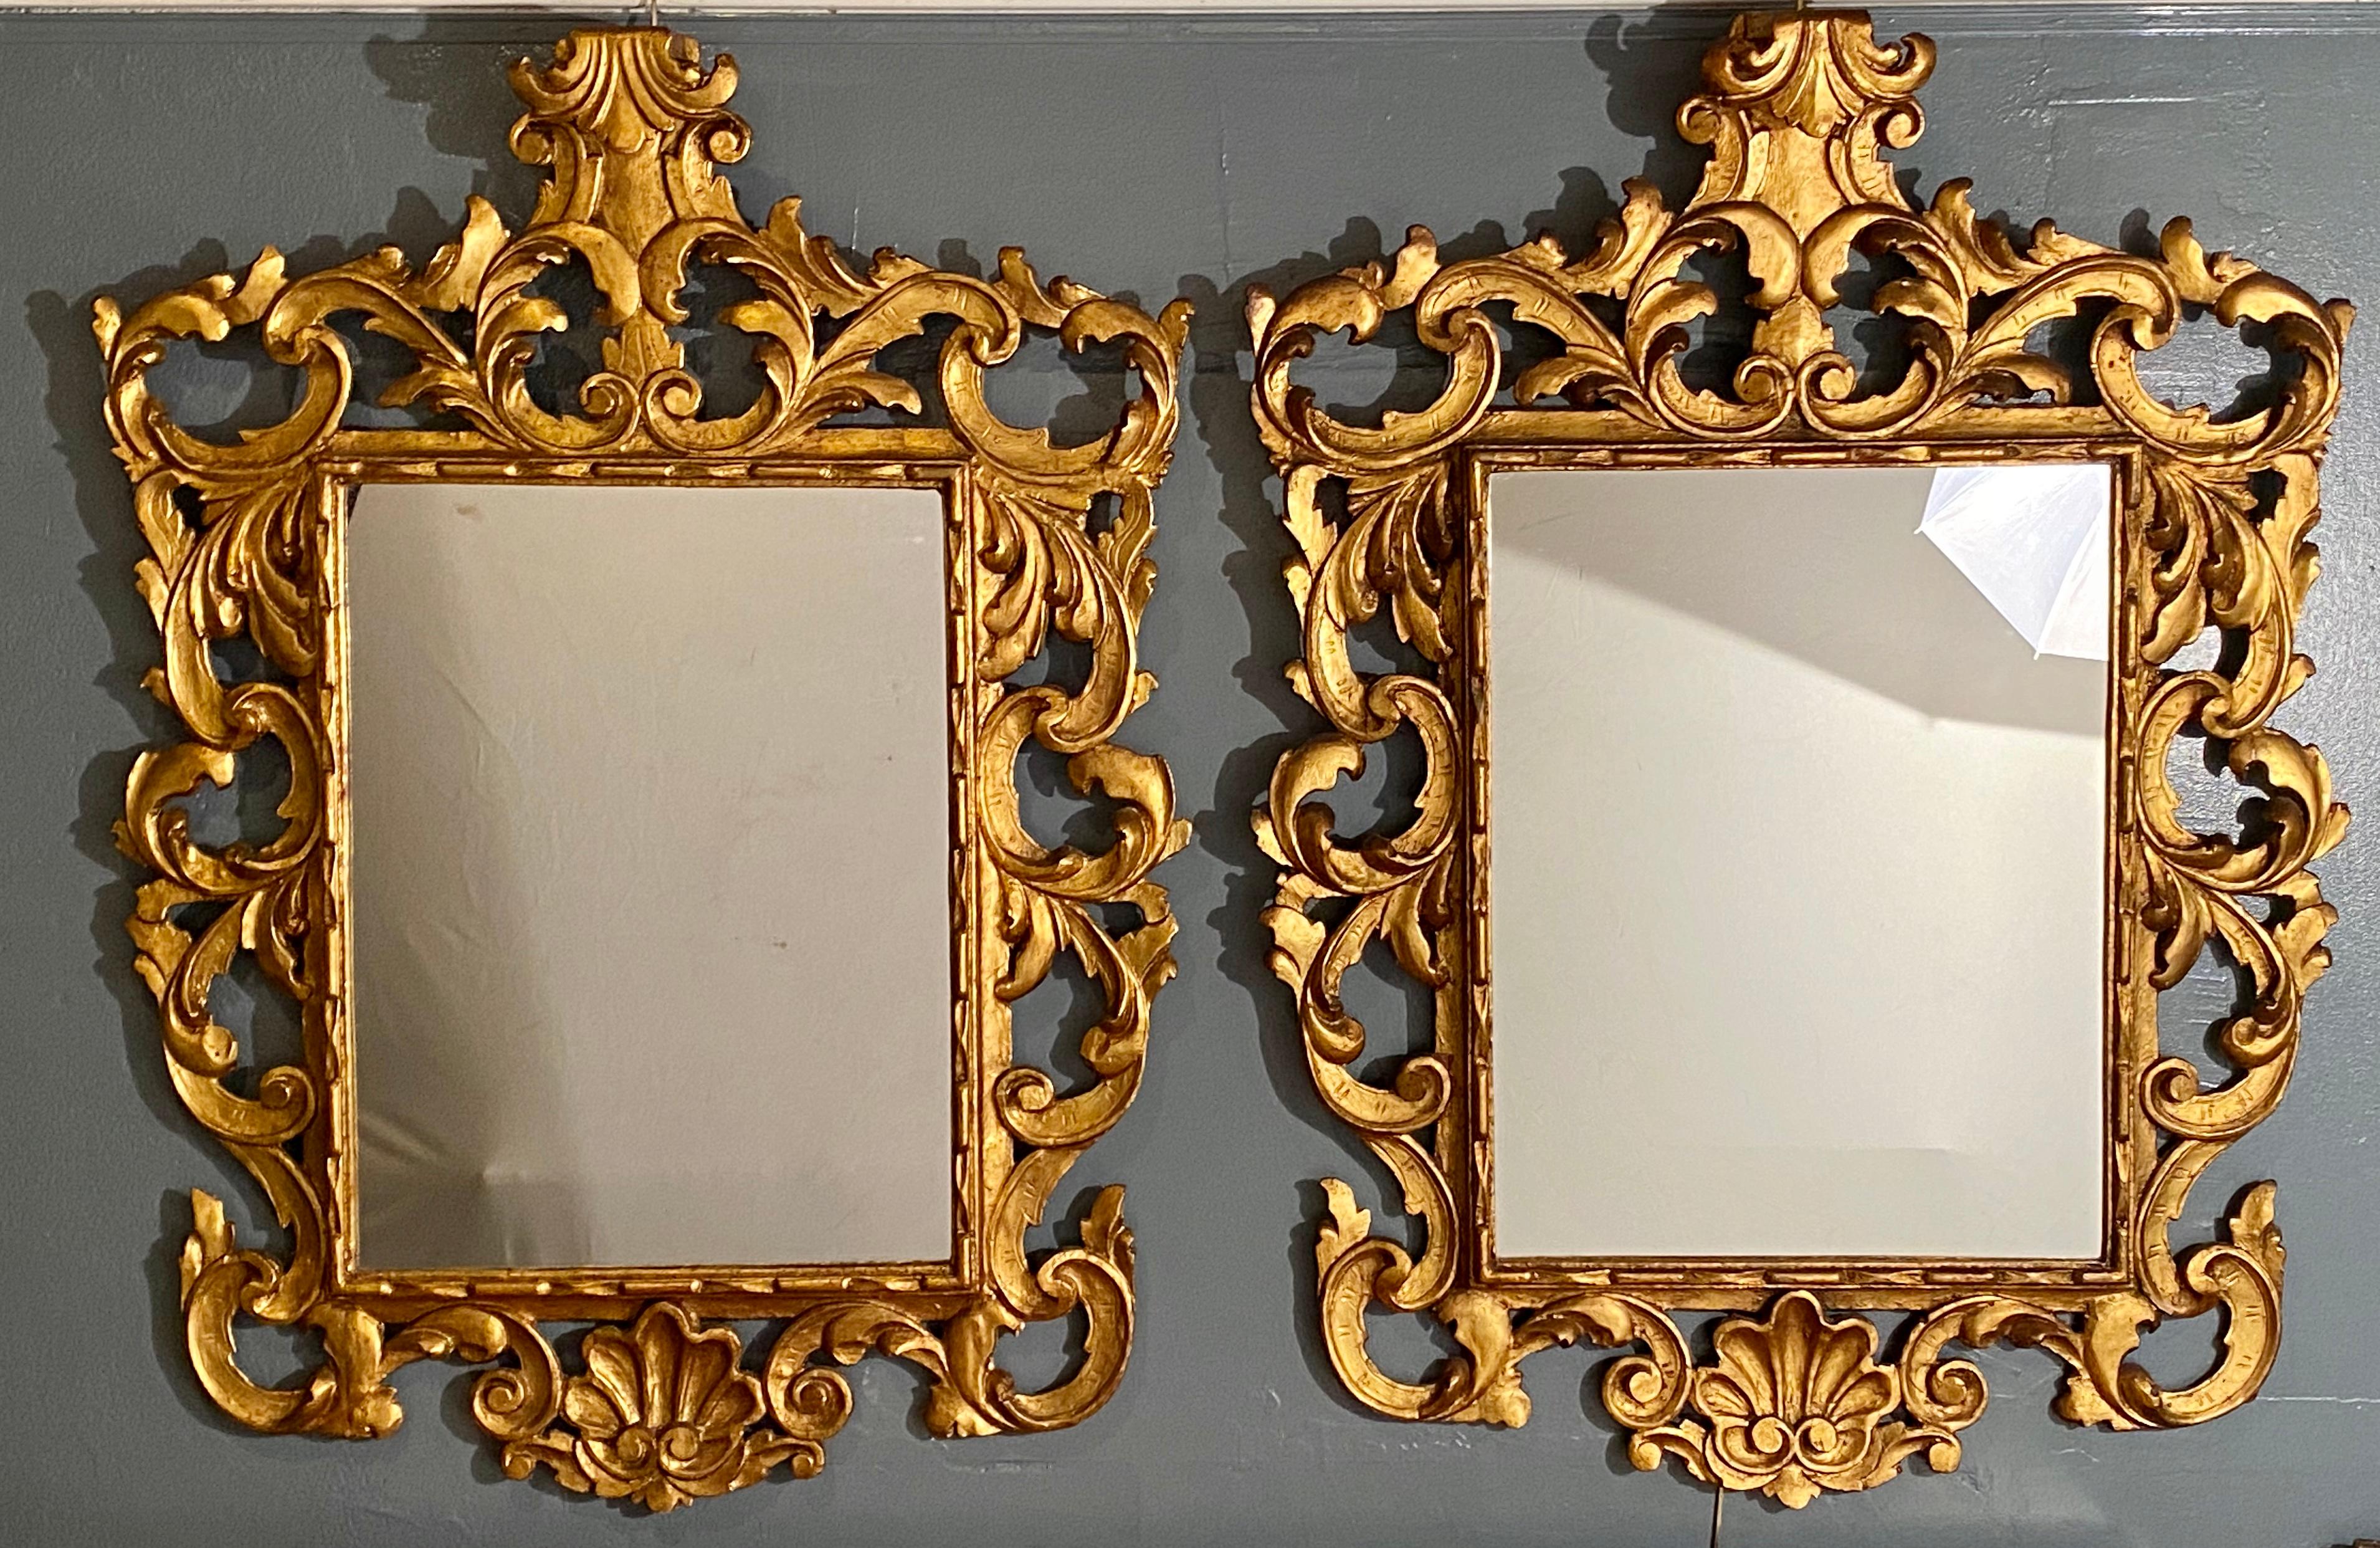 Pair of Rococo Style frame wall or console mirrors. This fine pair of Italian carved gilded wood surrounds these fine clear center mirror panels. The overall design replicating the Rococo era at its peak of style and grace. The frames with